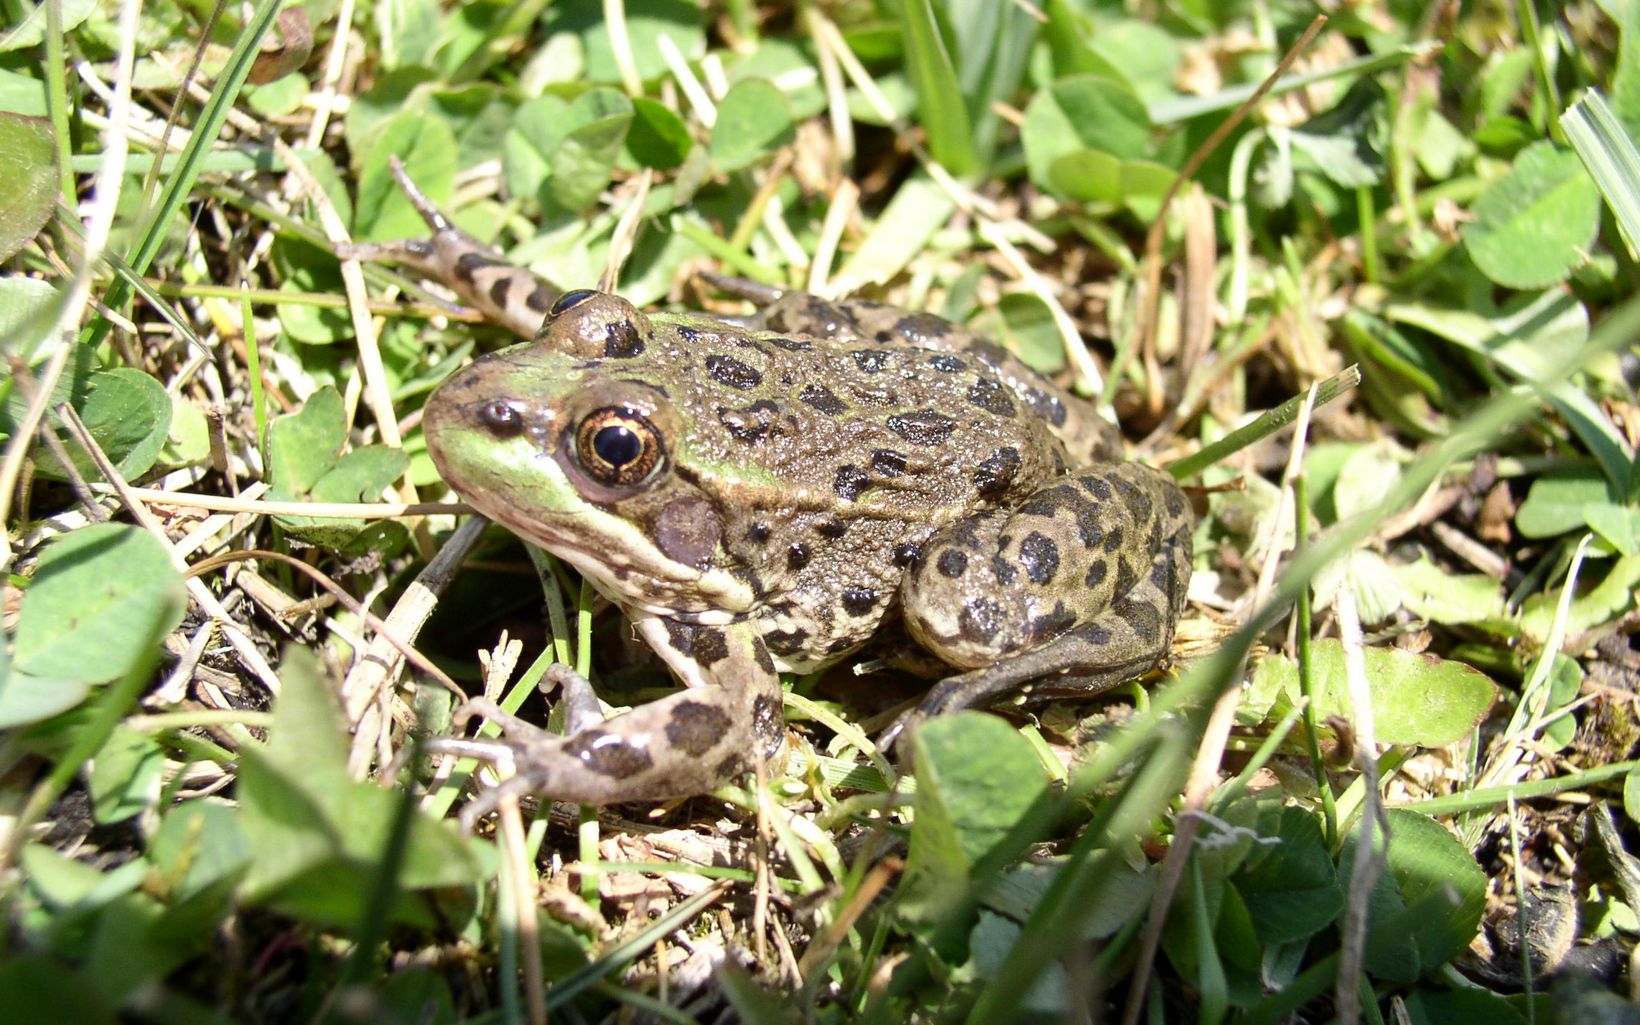 Spotted frog in grass illuminated by sunlight.